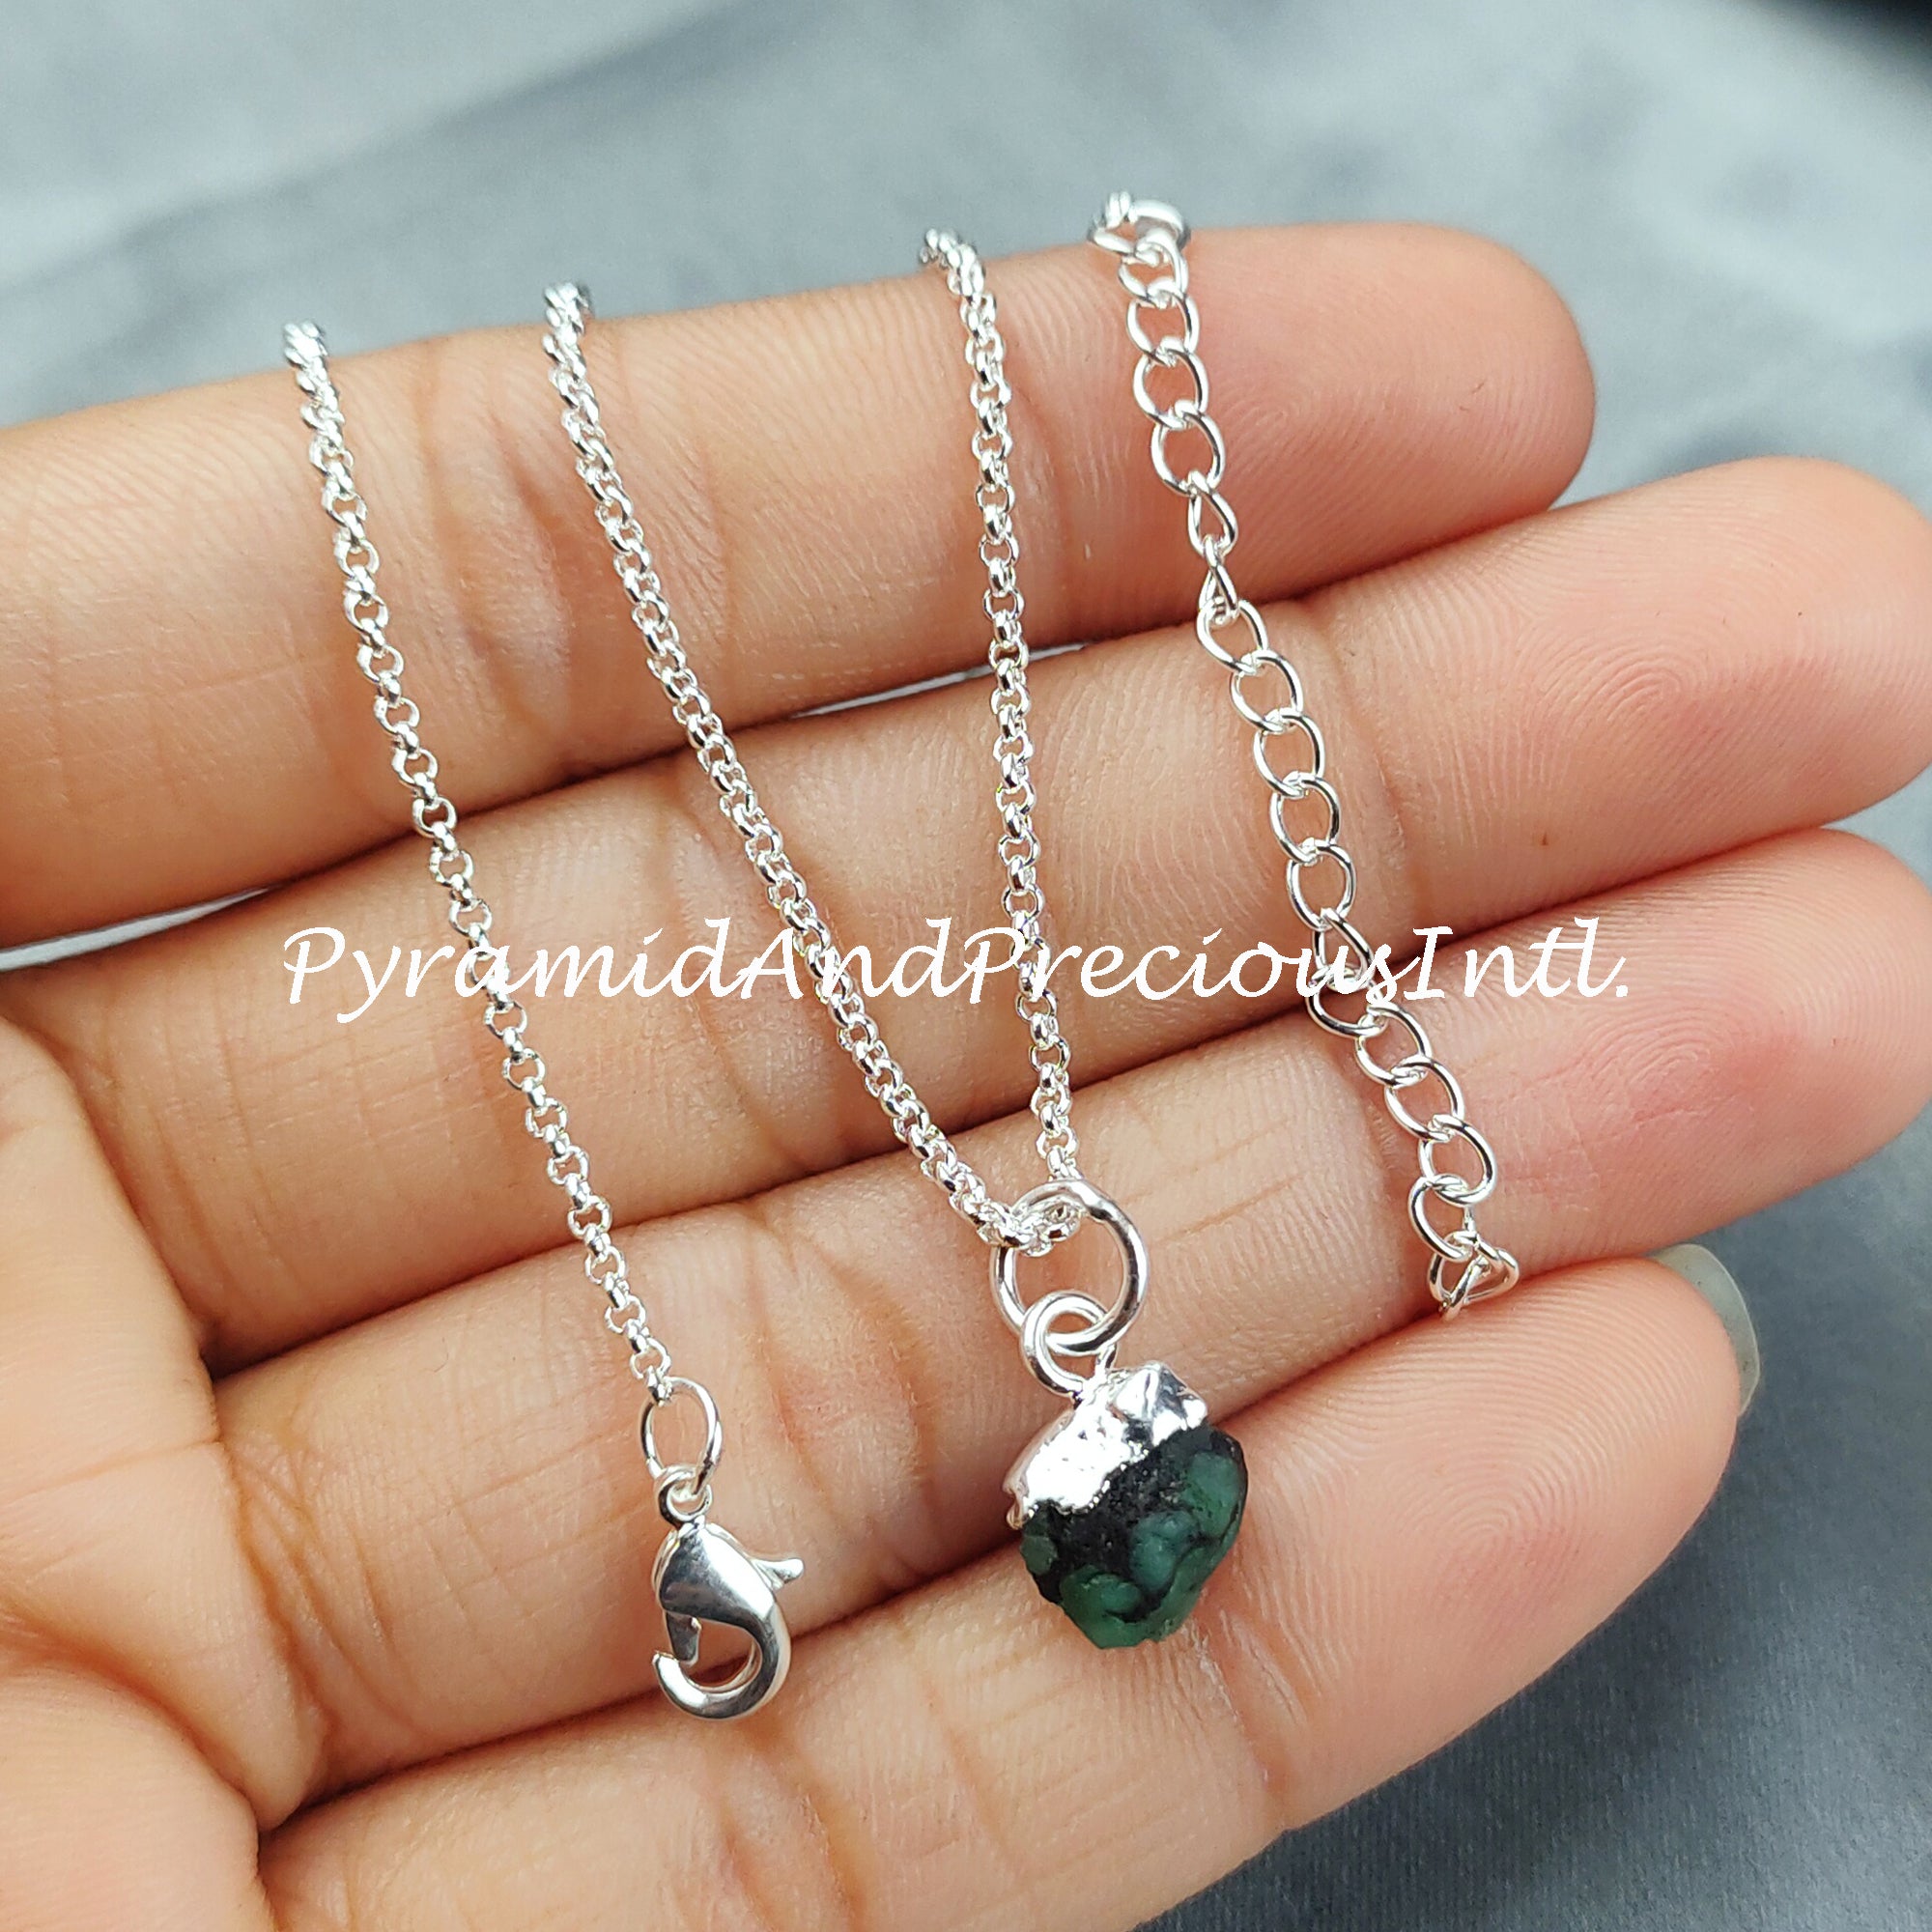 Raw Emerald Necklace, Emerald Jewellery, Natural Emerald Jewelry, Raw Birthstone, Gift Idea, Sold By Piece